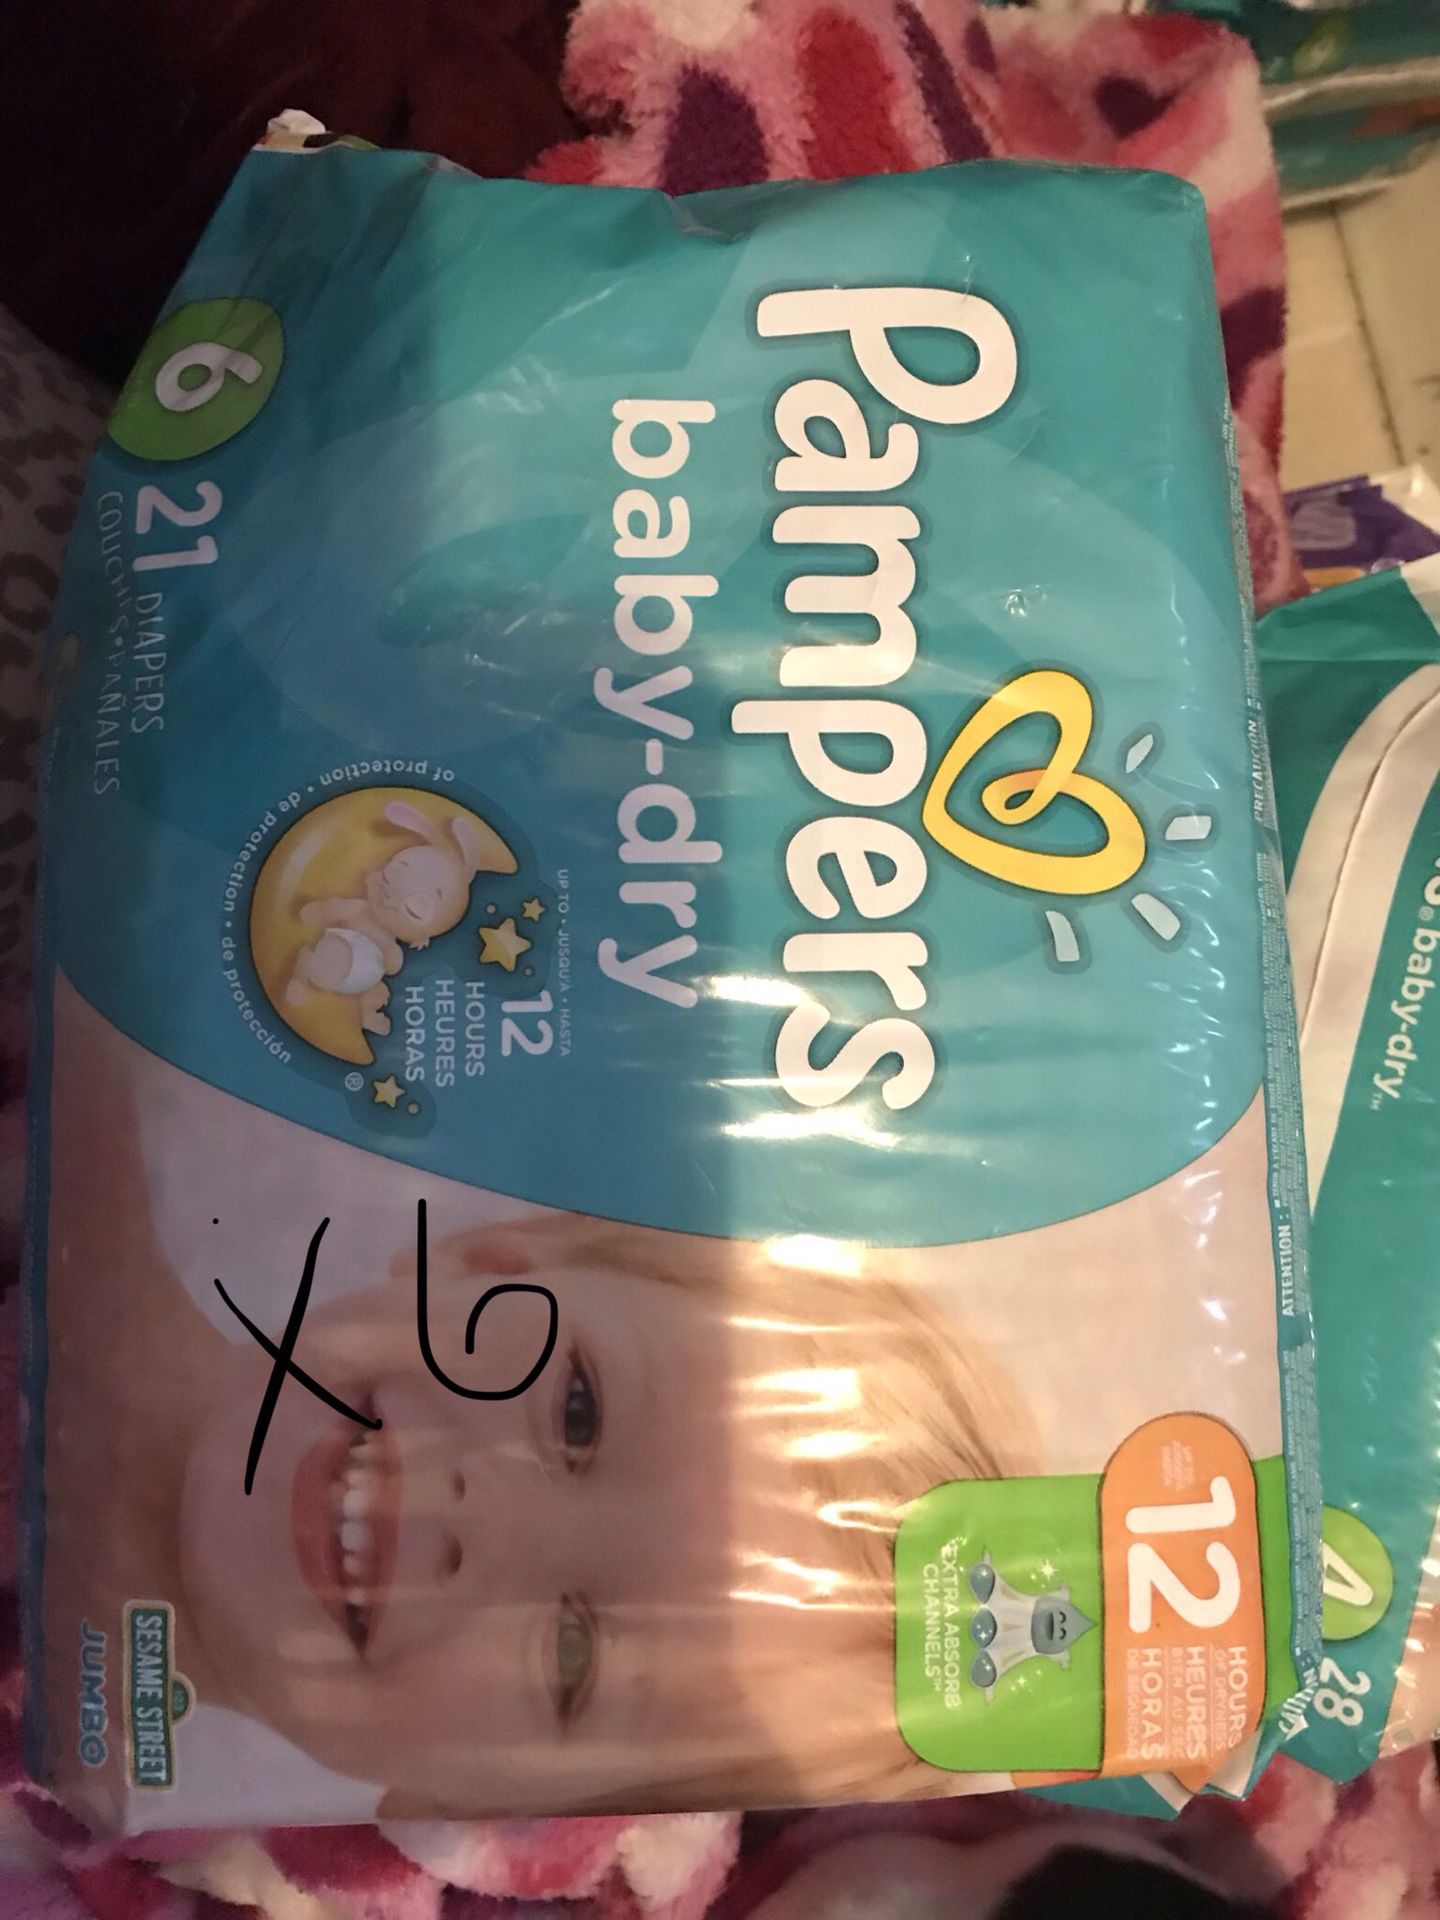 5 packs of size 6 pampers.